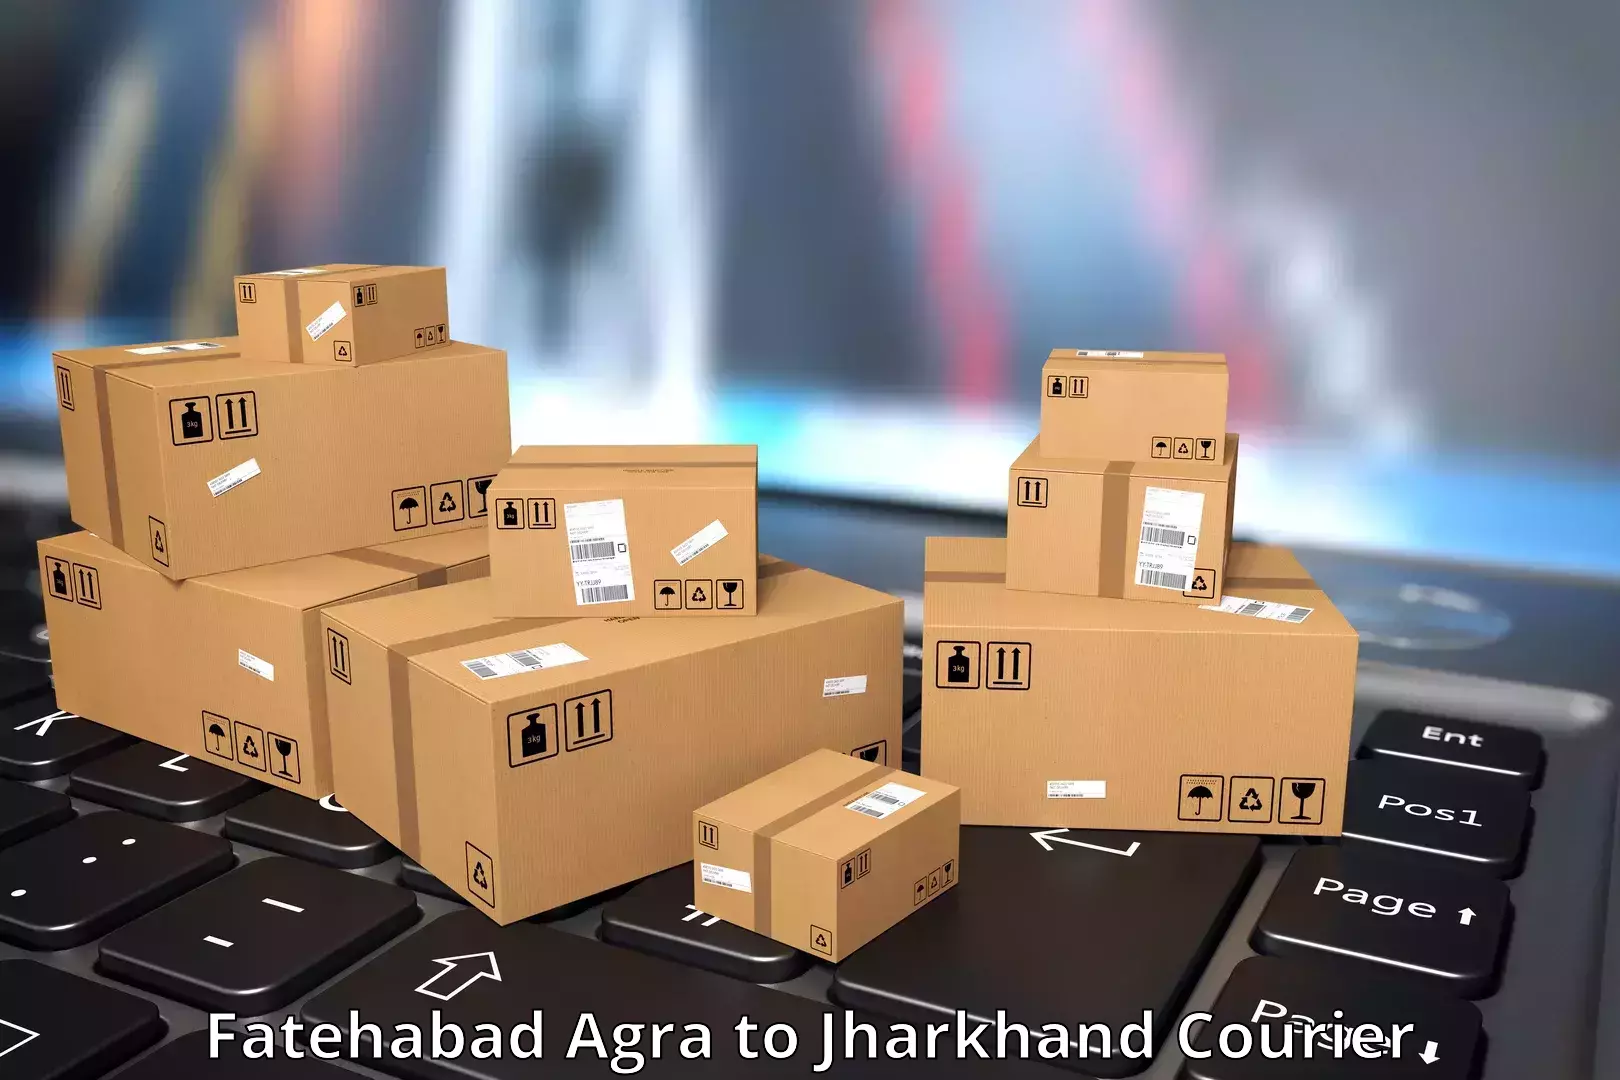 Same-day delivery options Fatehabad Agra to Rajmahal